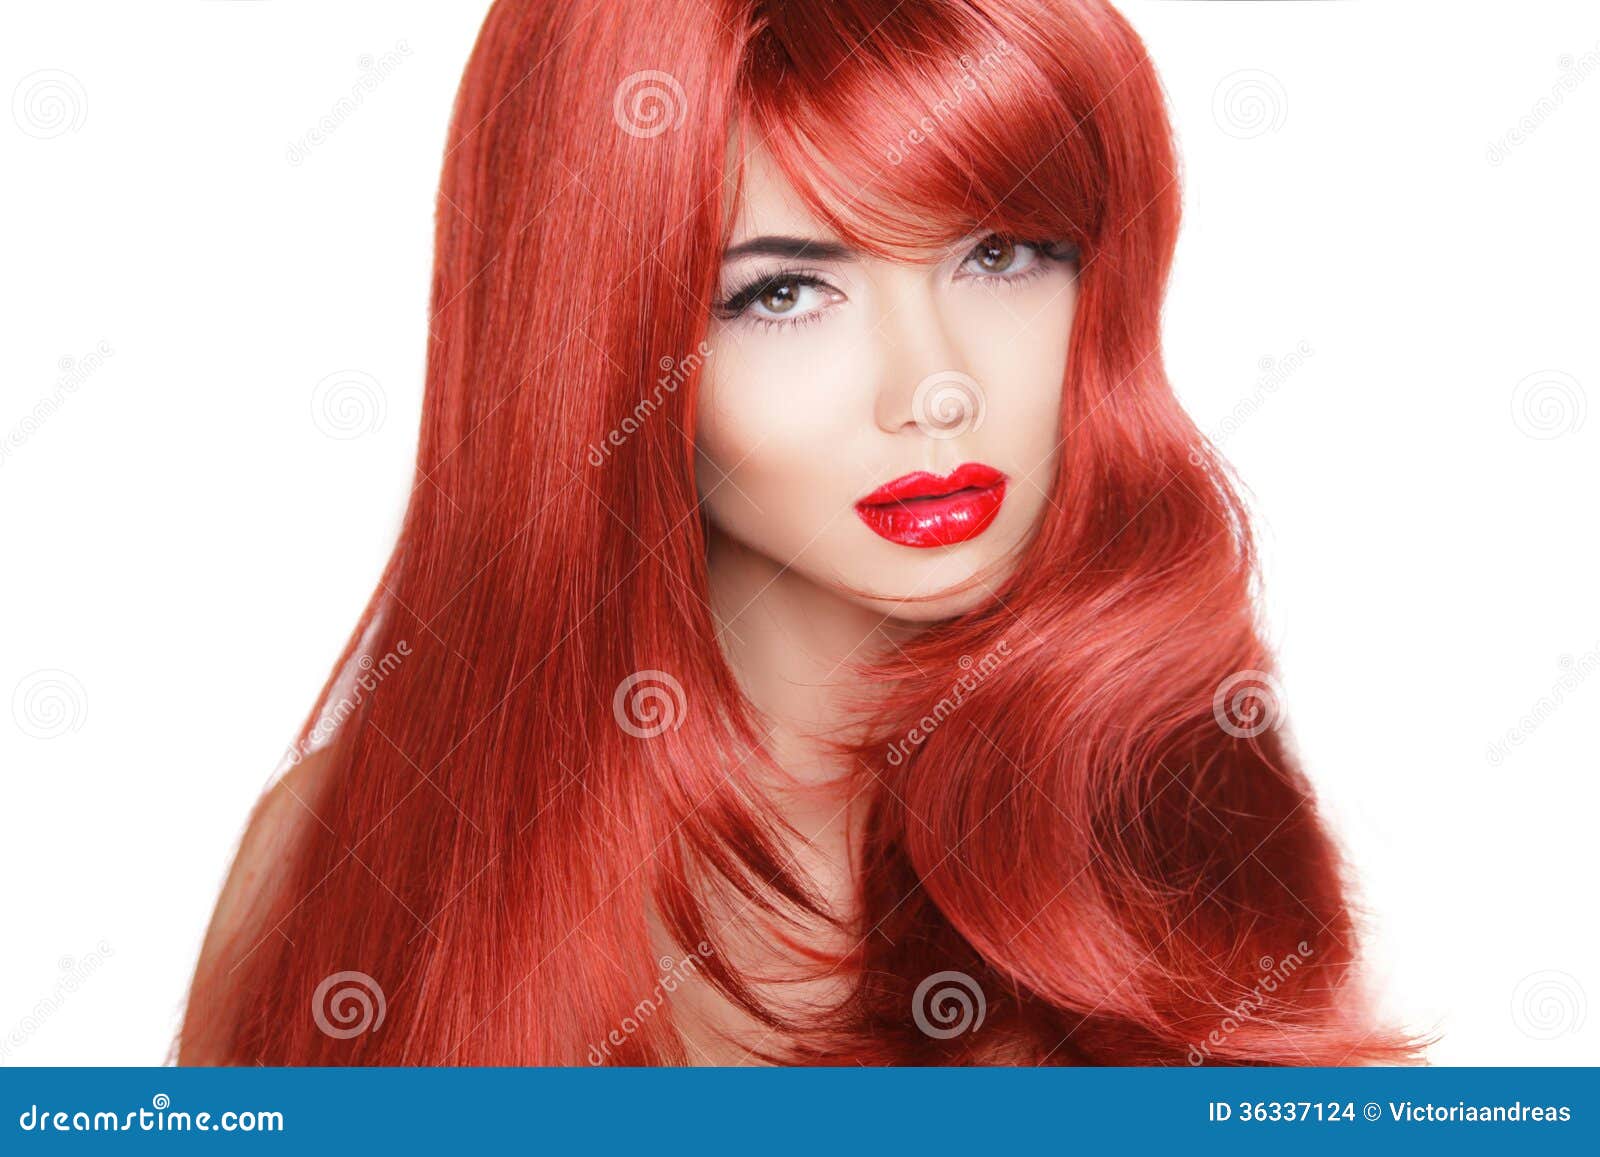 Long Red Hair Models Cool Hairstyles